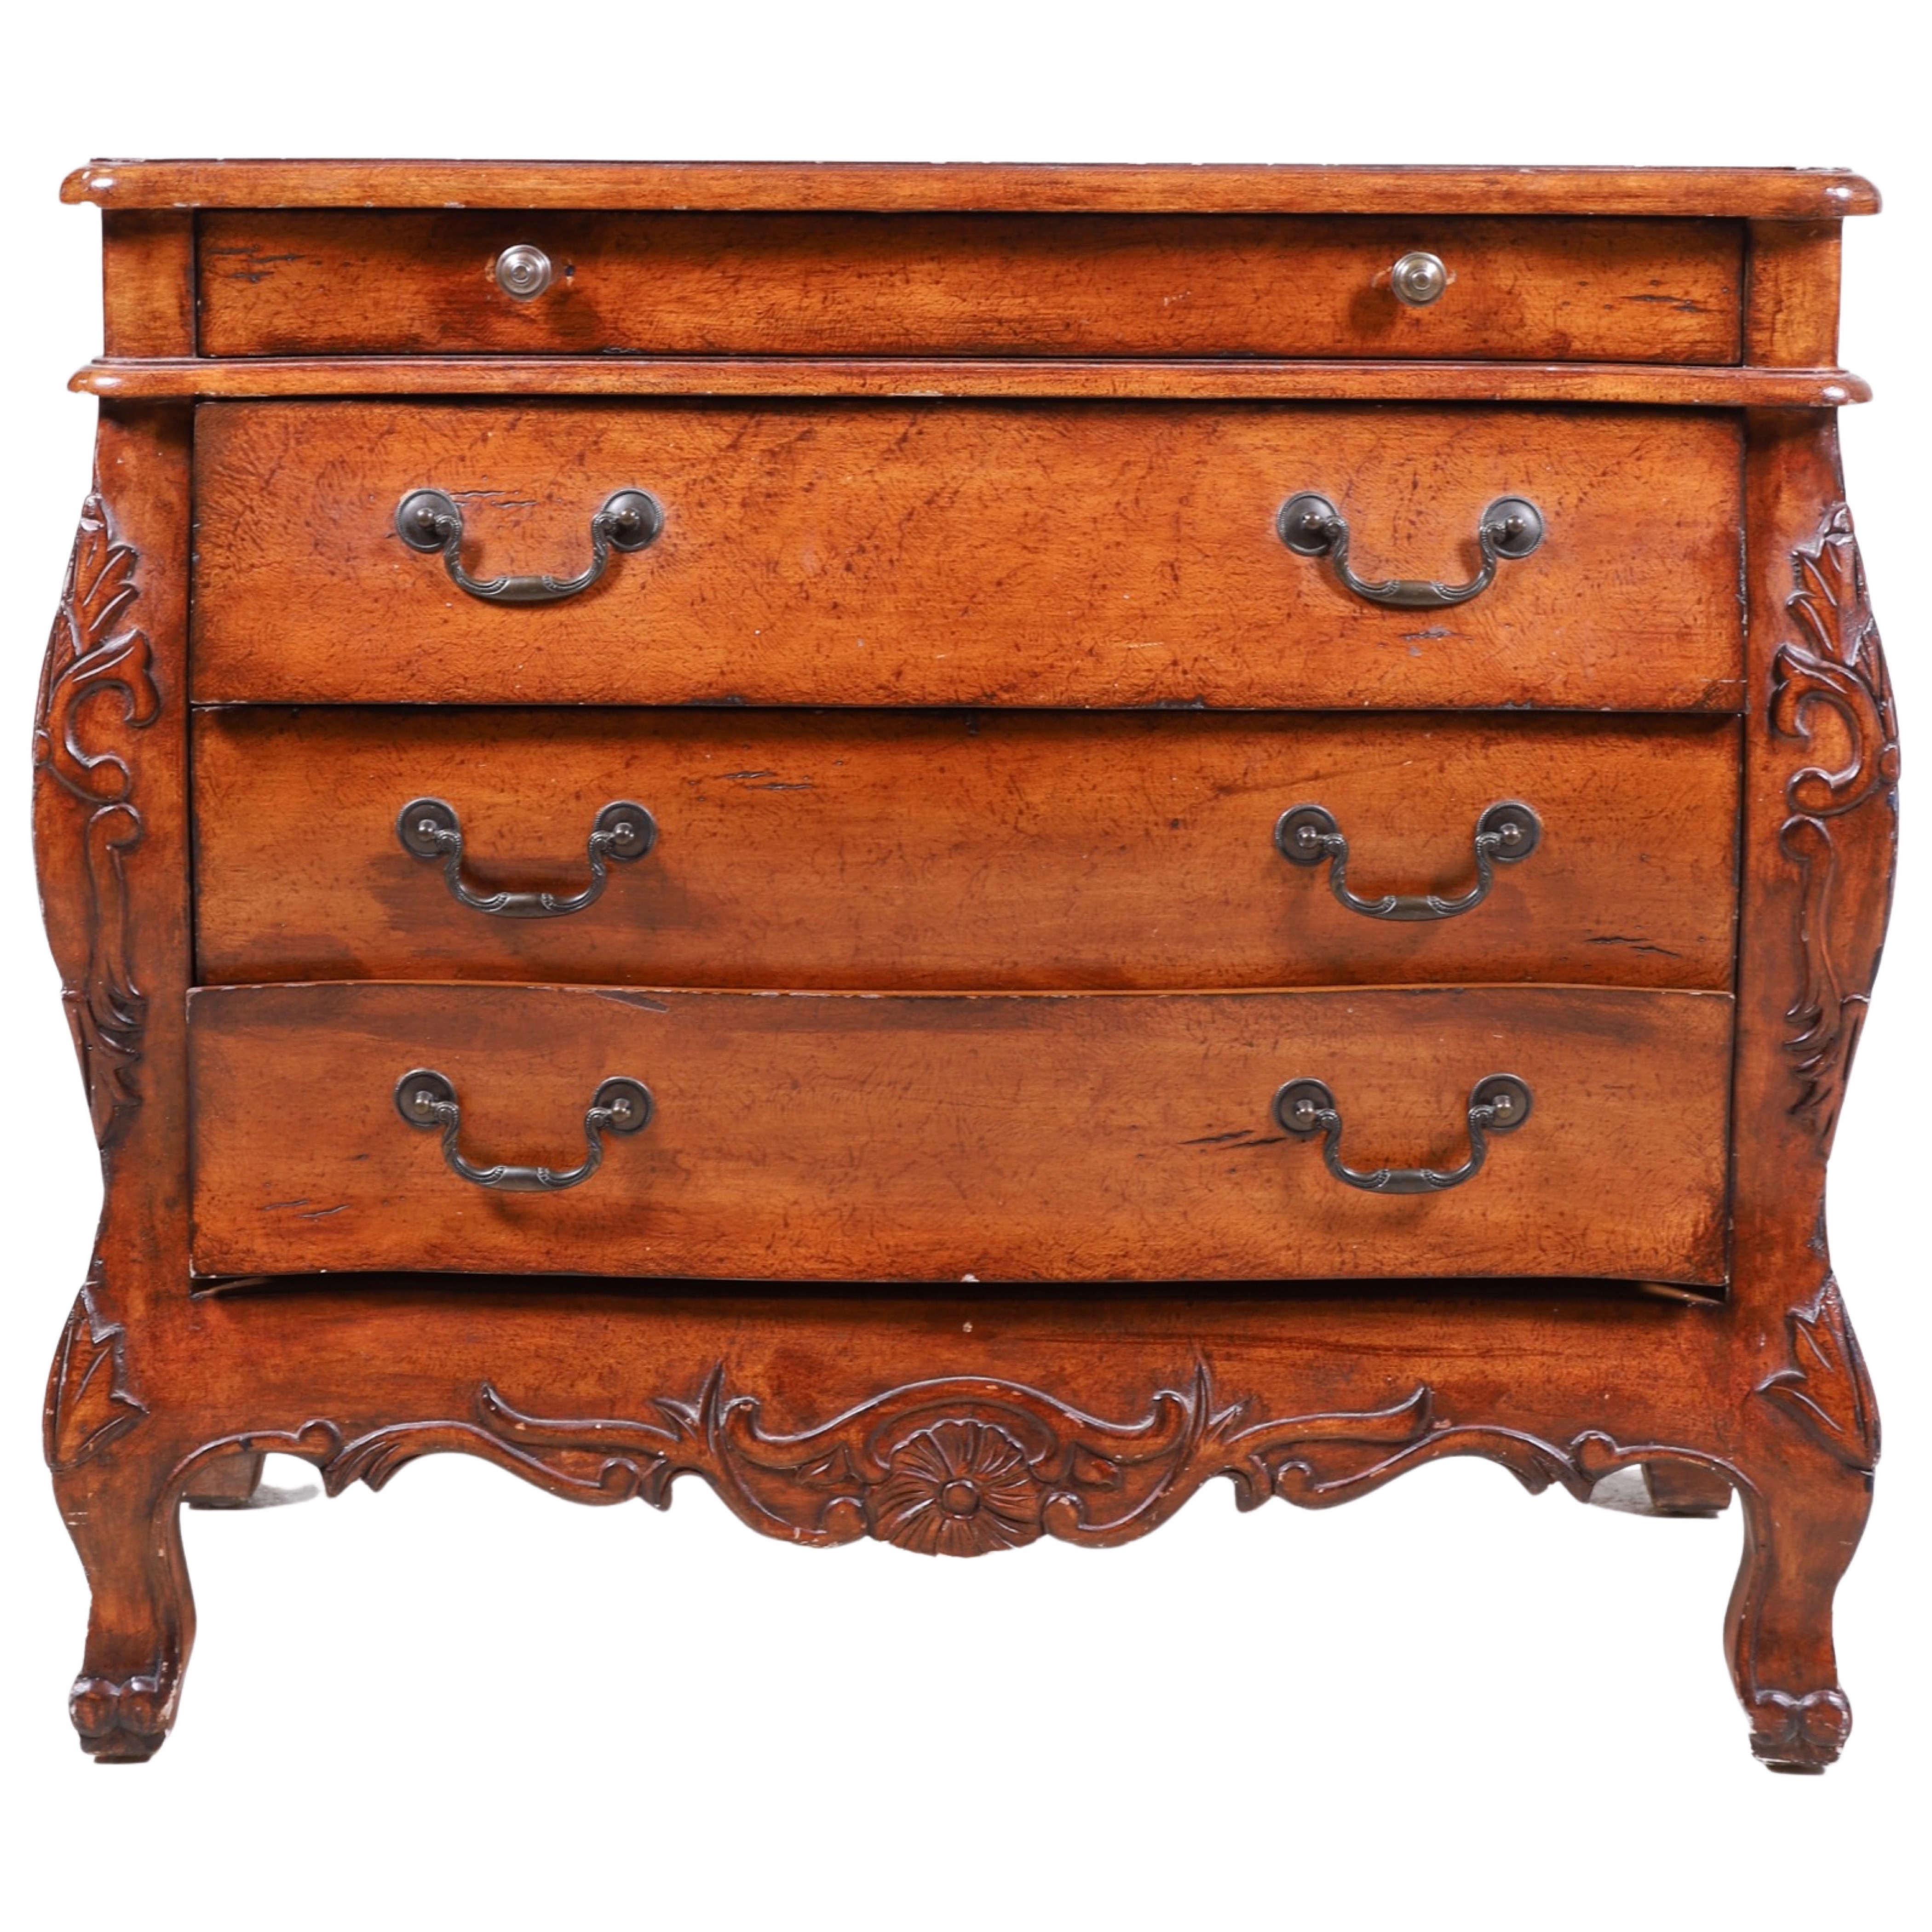 French style chest of drawers, lingerie